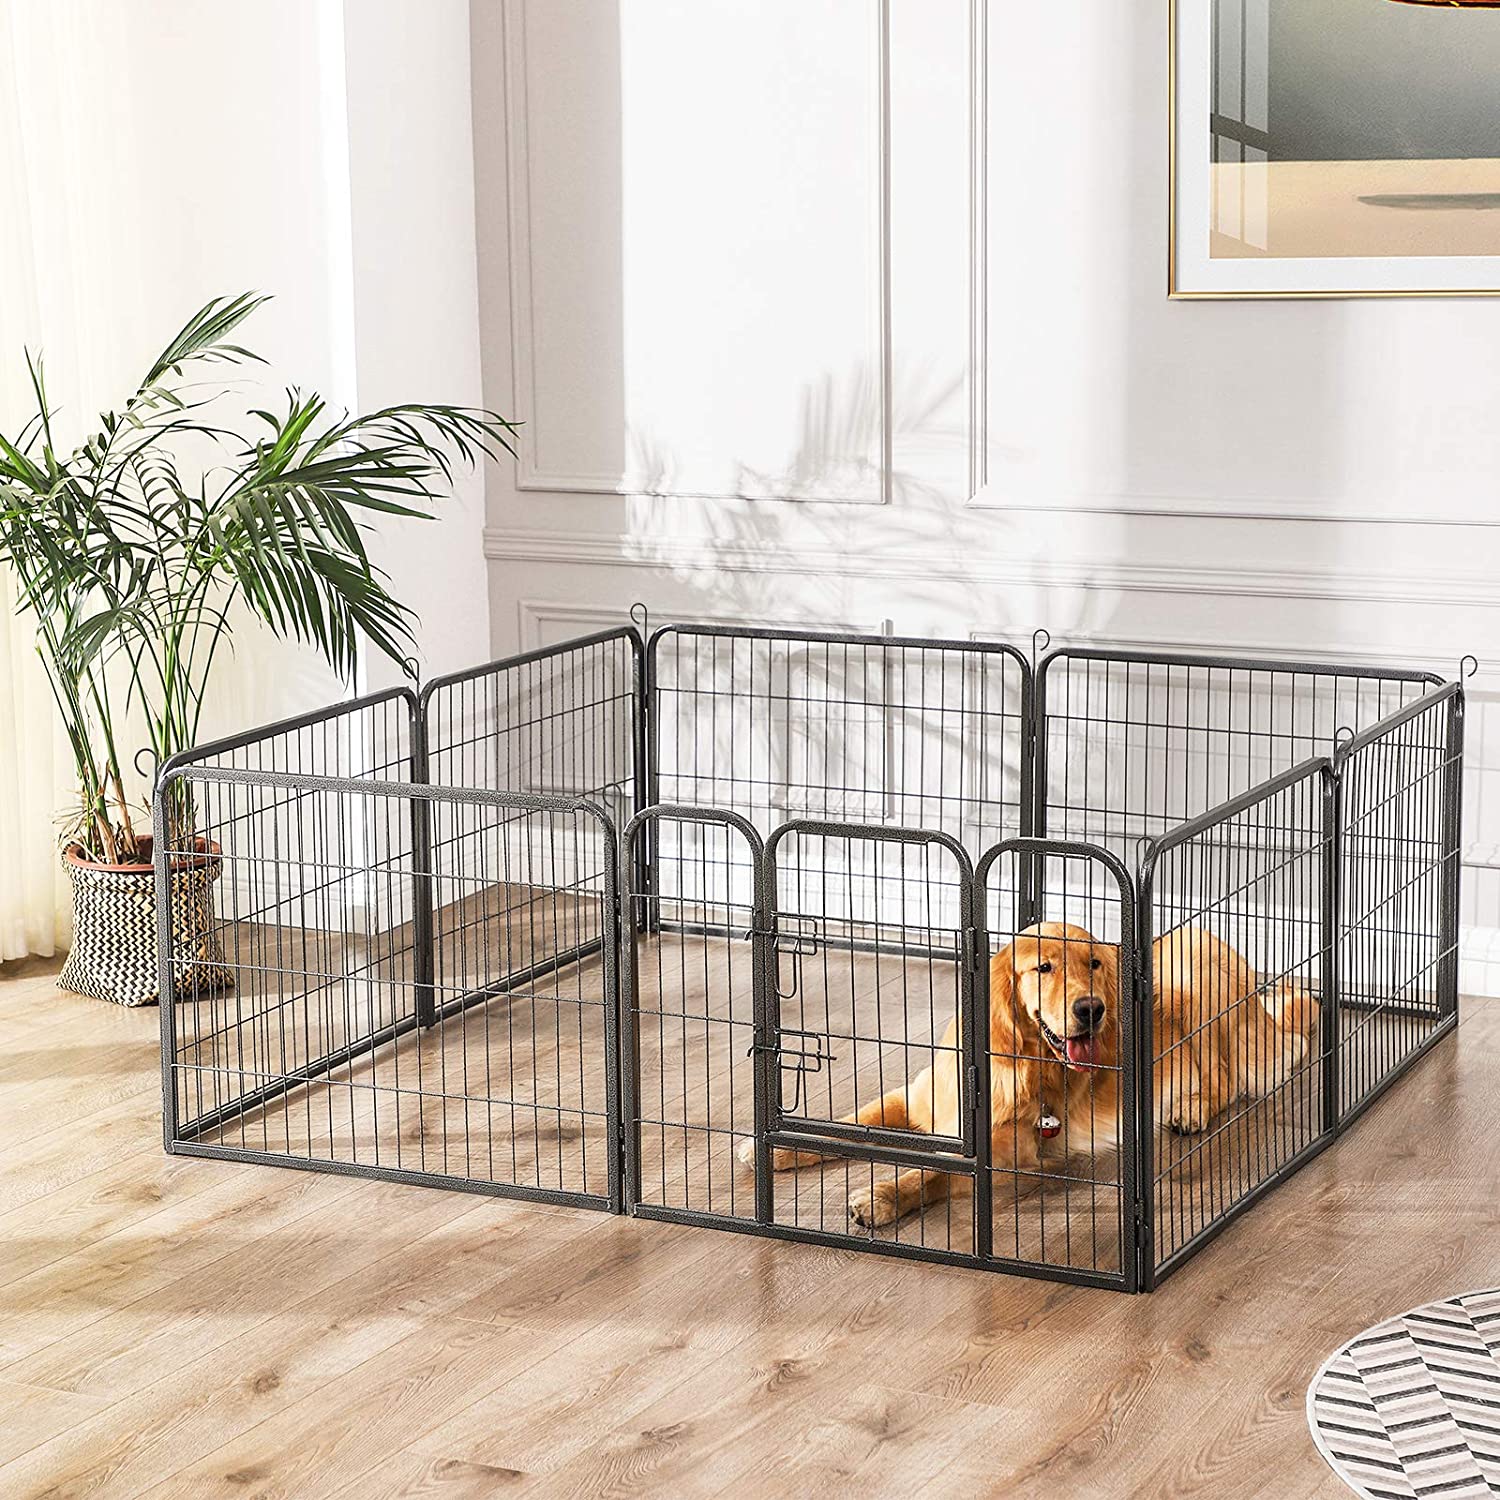 Nancy's Dog Crate - Dog Crate - Dog Kennel - Pet Playpen - Dog Daycare for Dogs